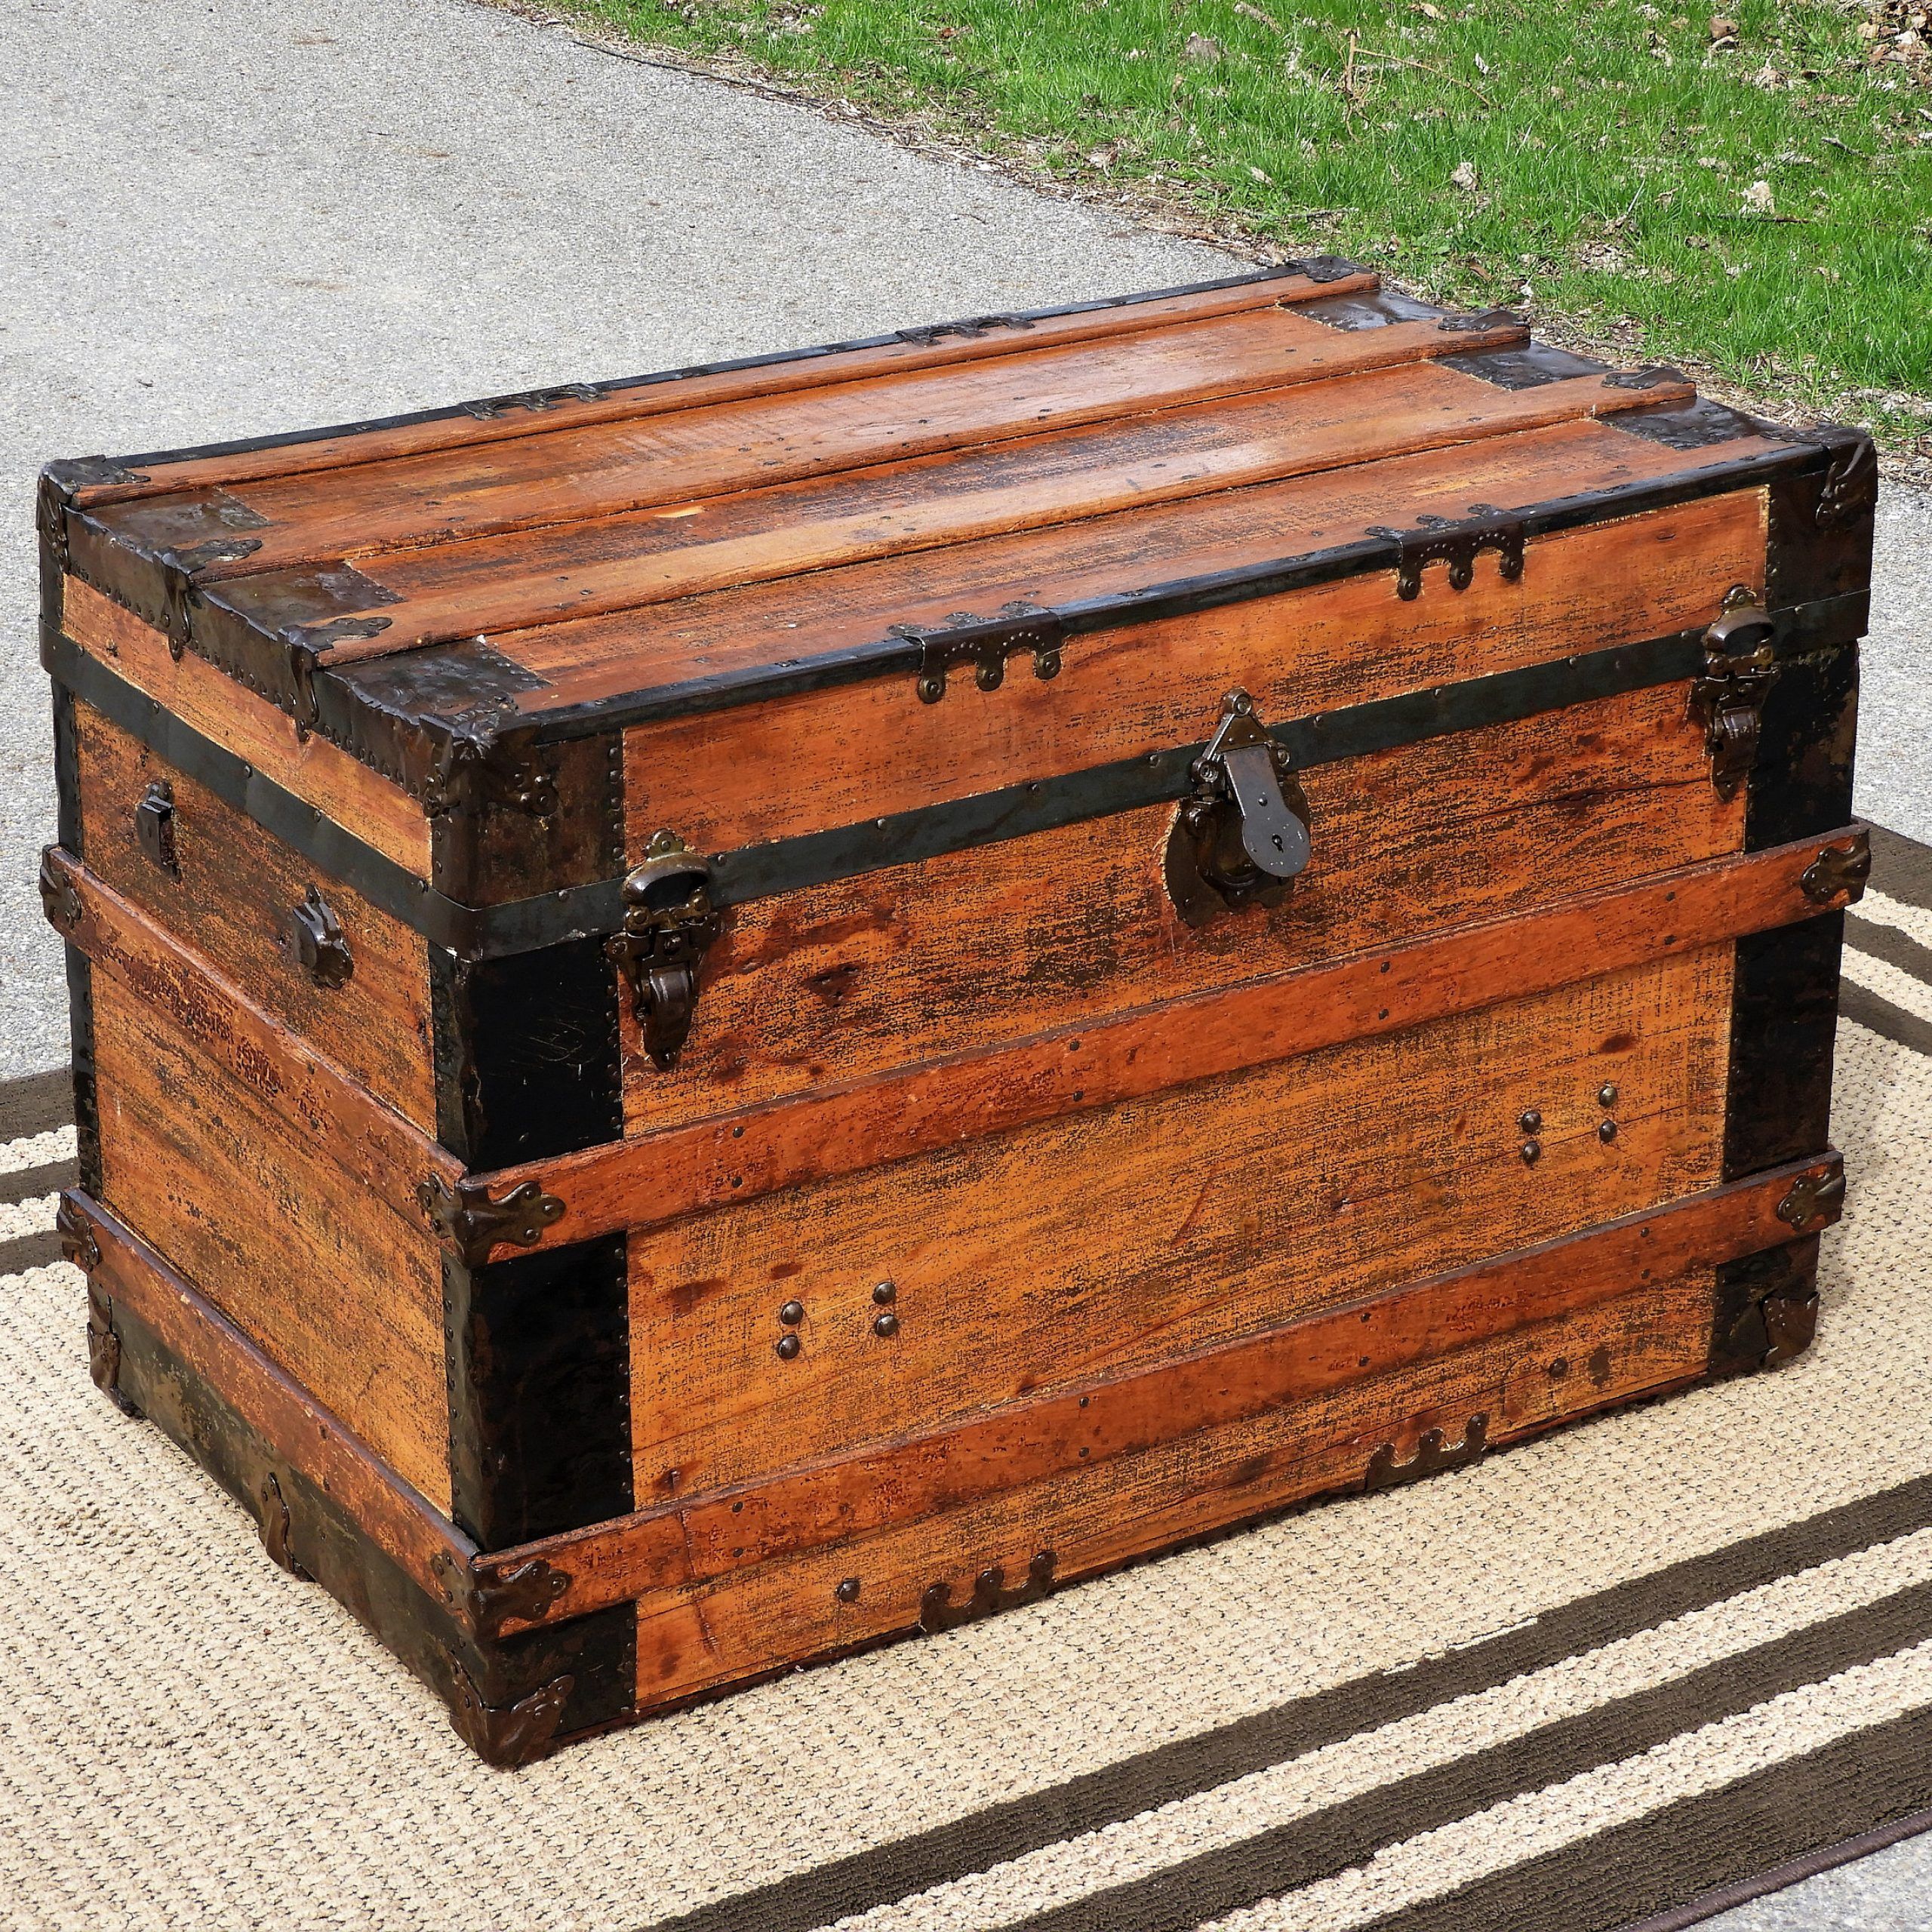 Antique Steamer Trunk, Wooden Coffee Table, Industrial Decor, Country Intended For Antique Brown 2 Door Wood Desks (View 13 of 15)